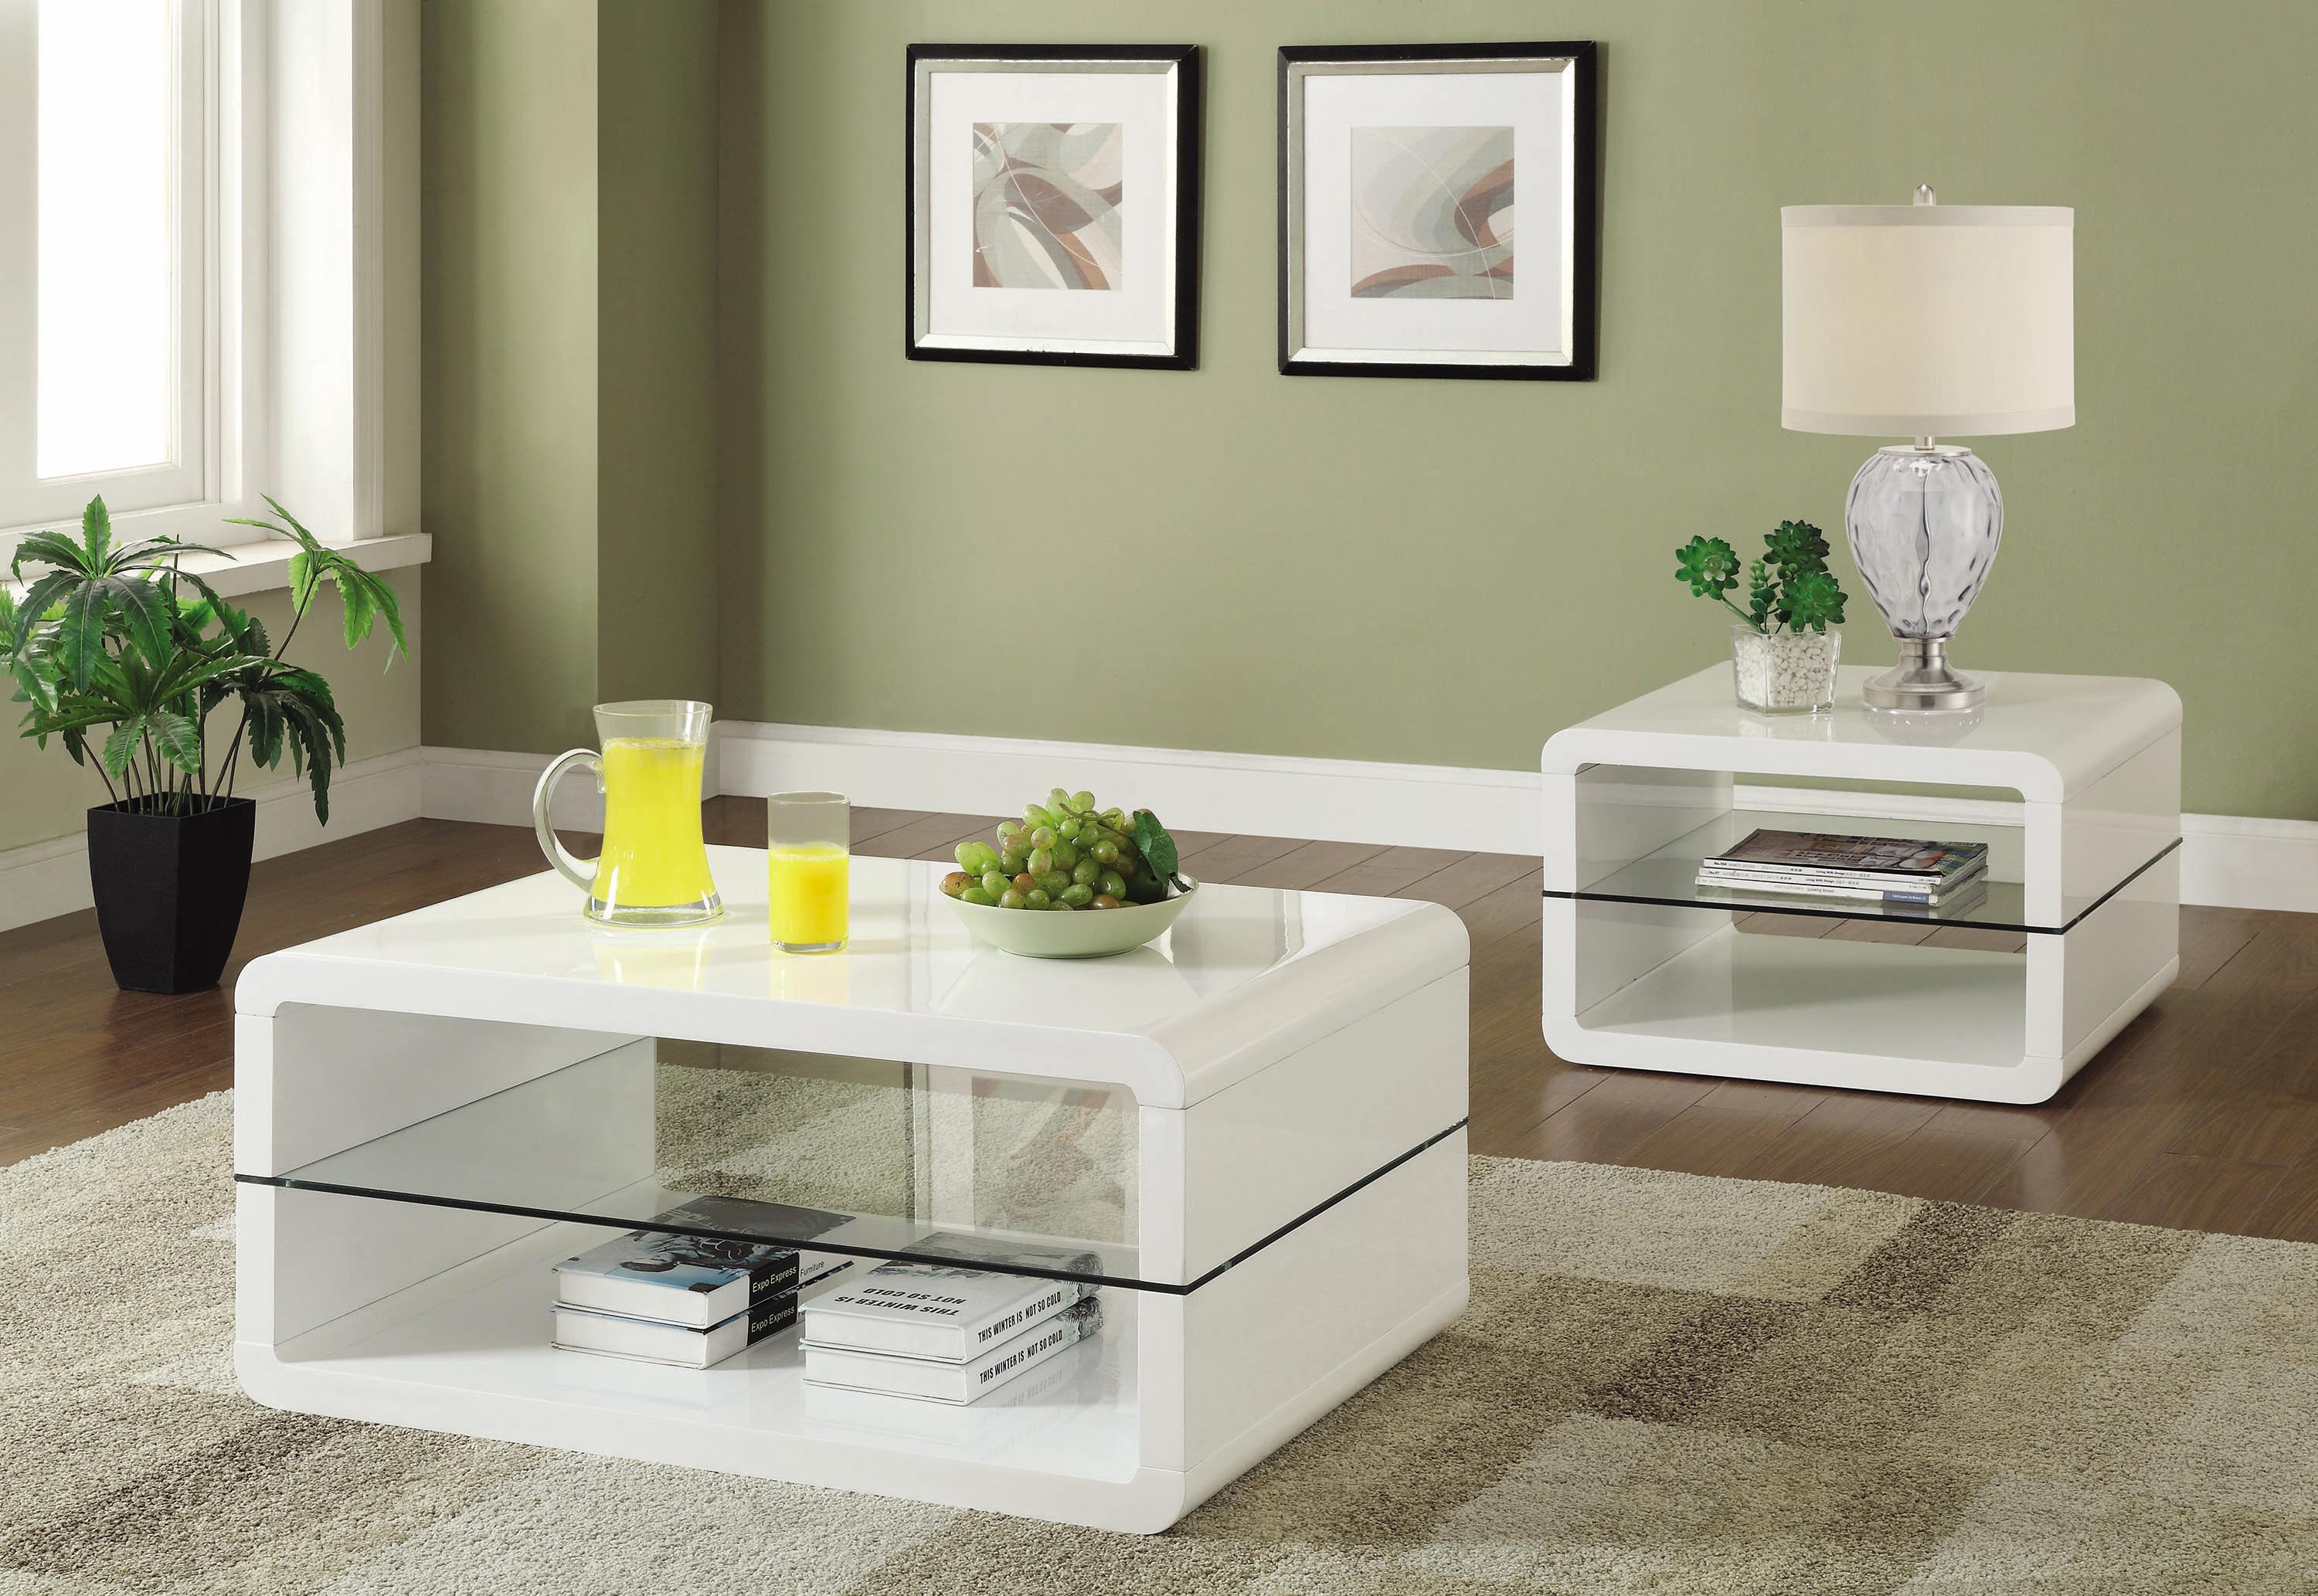 Contemporary Coffee Table Set 703268-S2 703268-S2 in White 